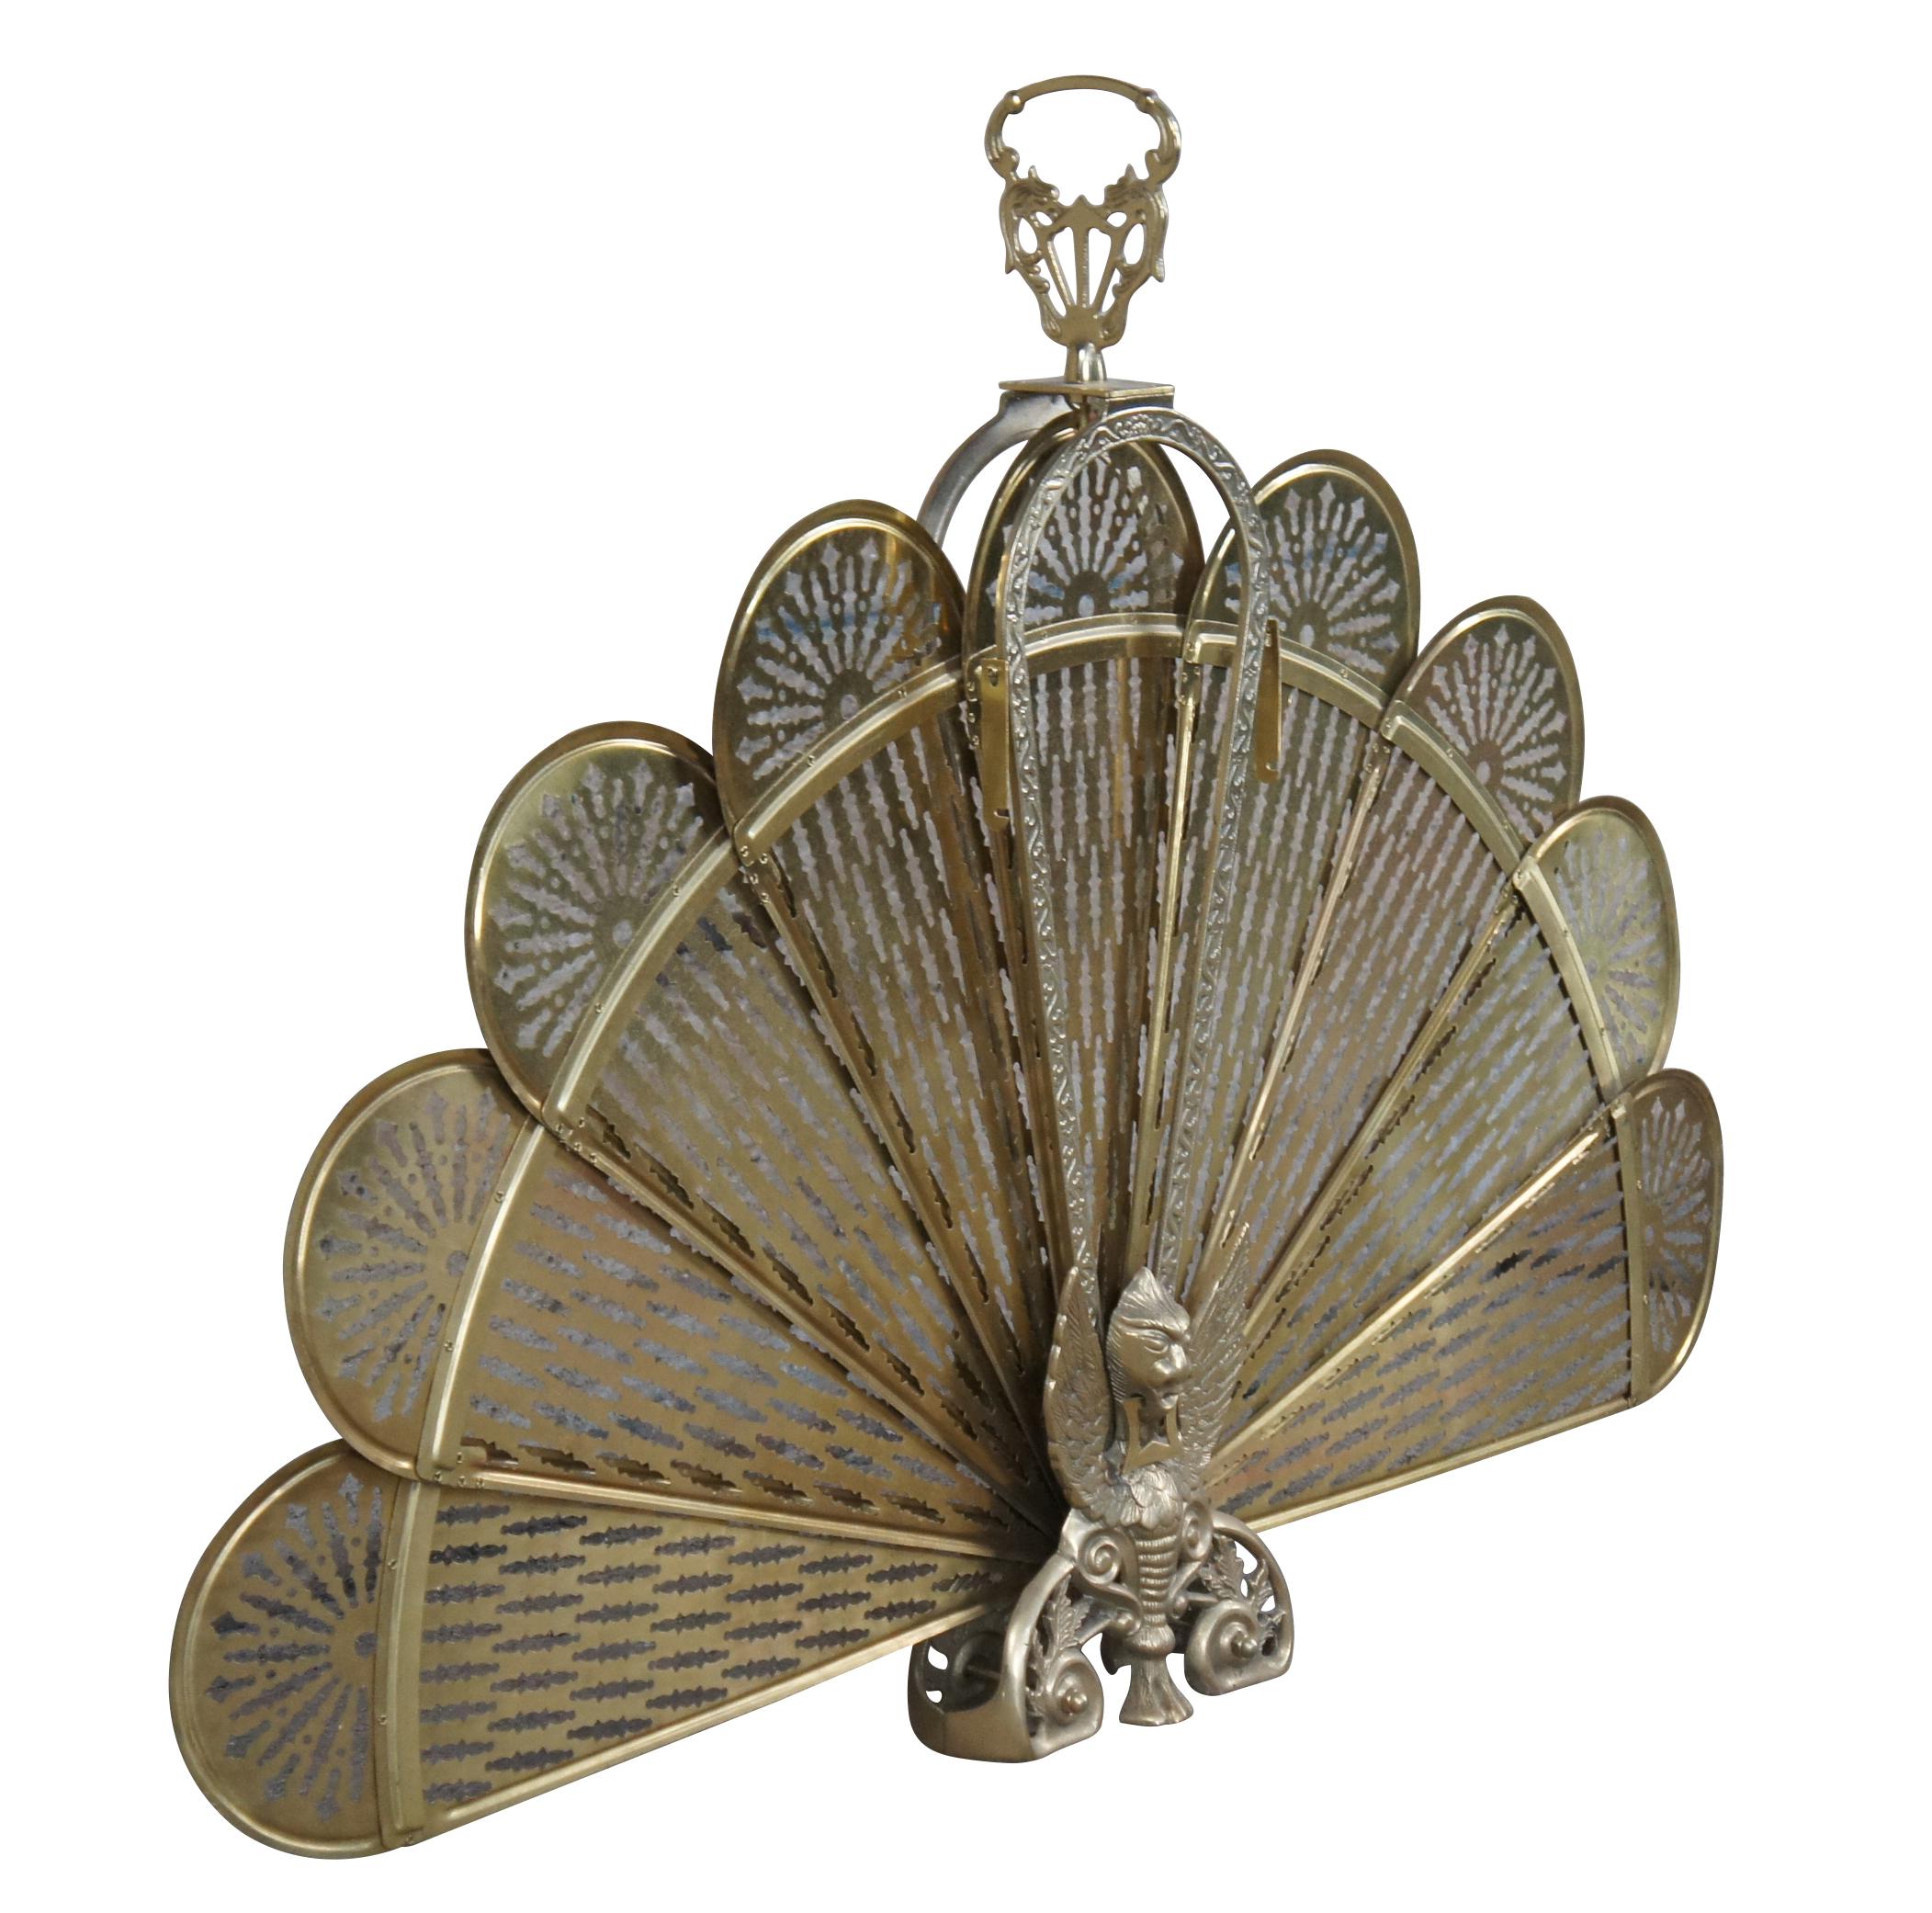 A vintage brass fireplace fan inspired by Art Deco & Victorian styling.  Features a peacock design with pierced blades, ornate handle and scrolled figural Phoenix / Griffin foot.  An eye catcher for any space!

Dimensions: 
Closed - 7